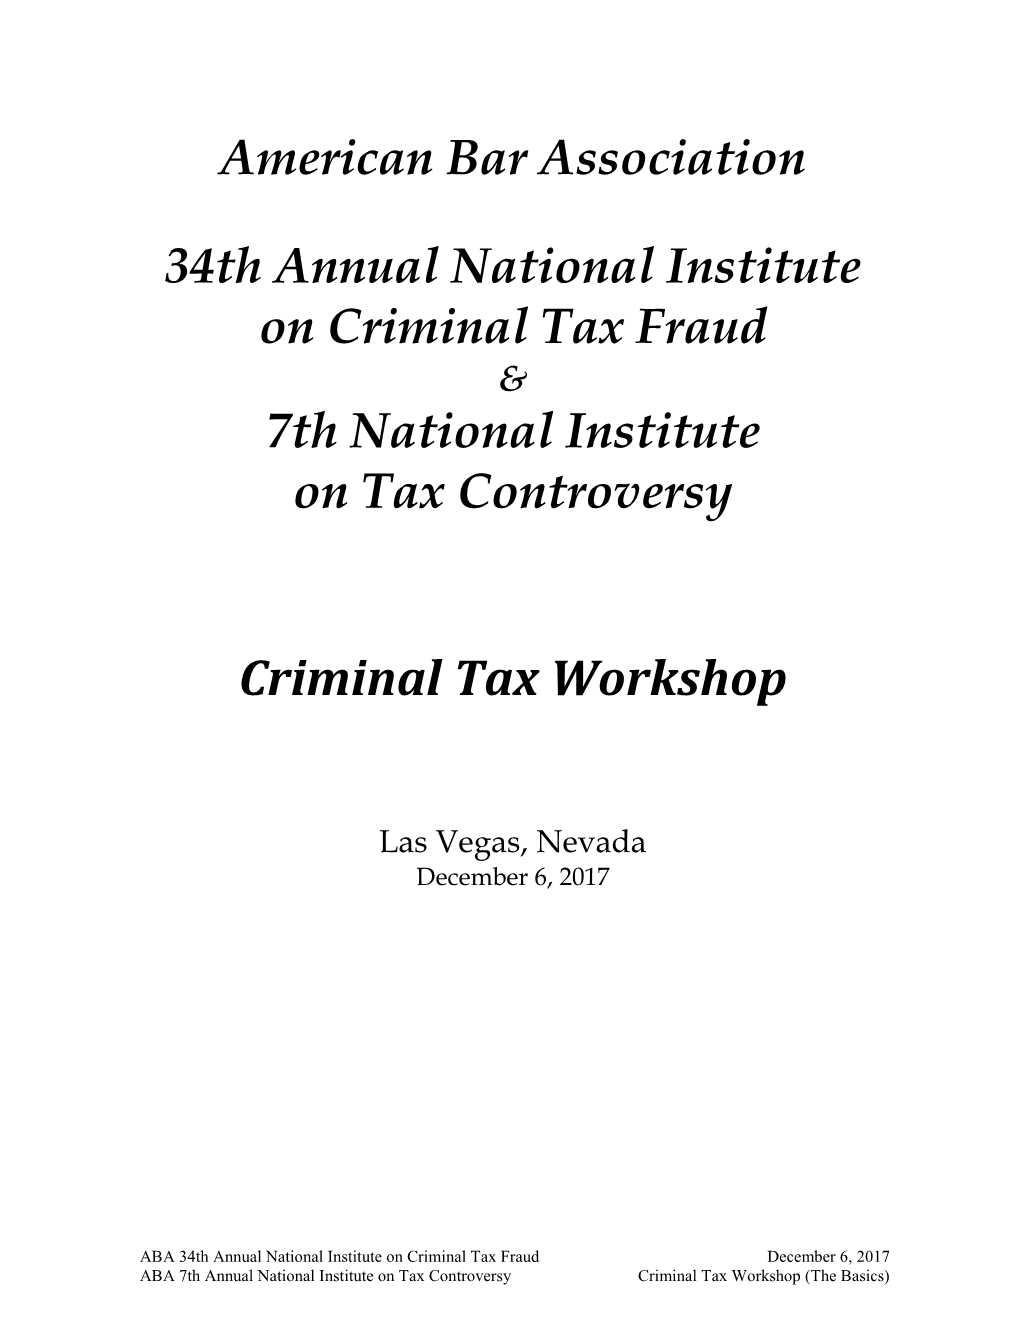 American Bar Association 34Th Annual National Institute on Criminal Tax